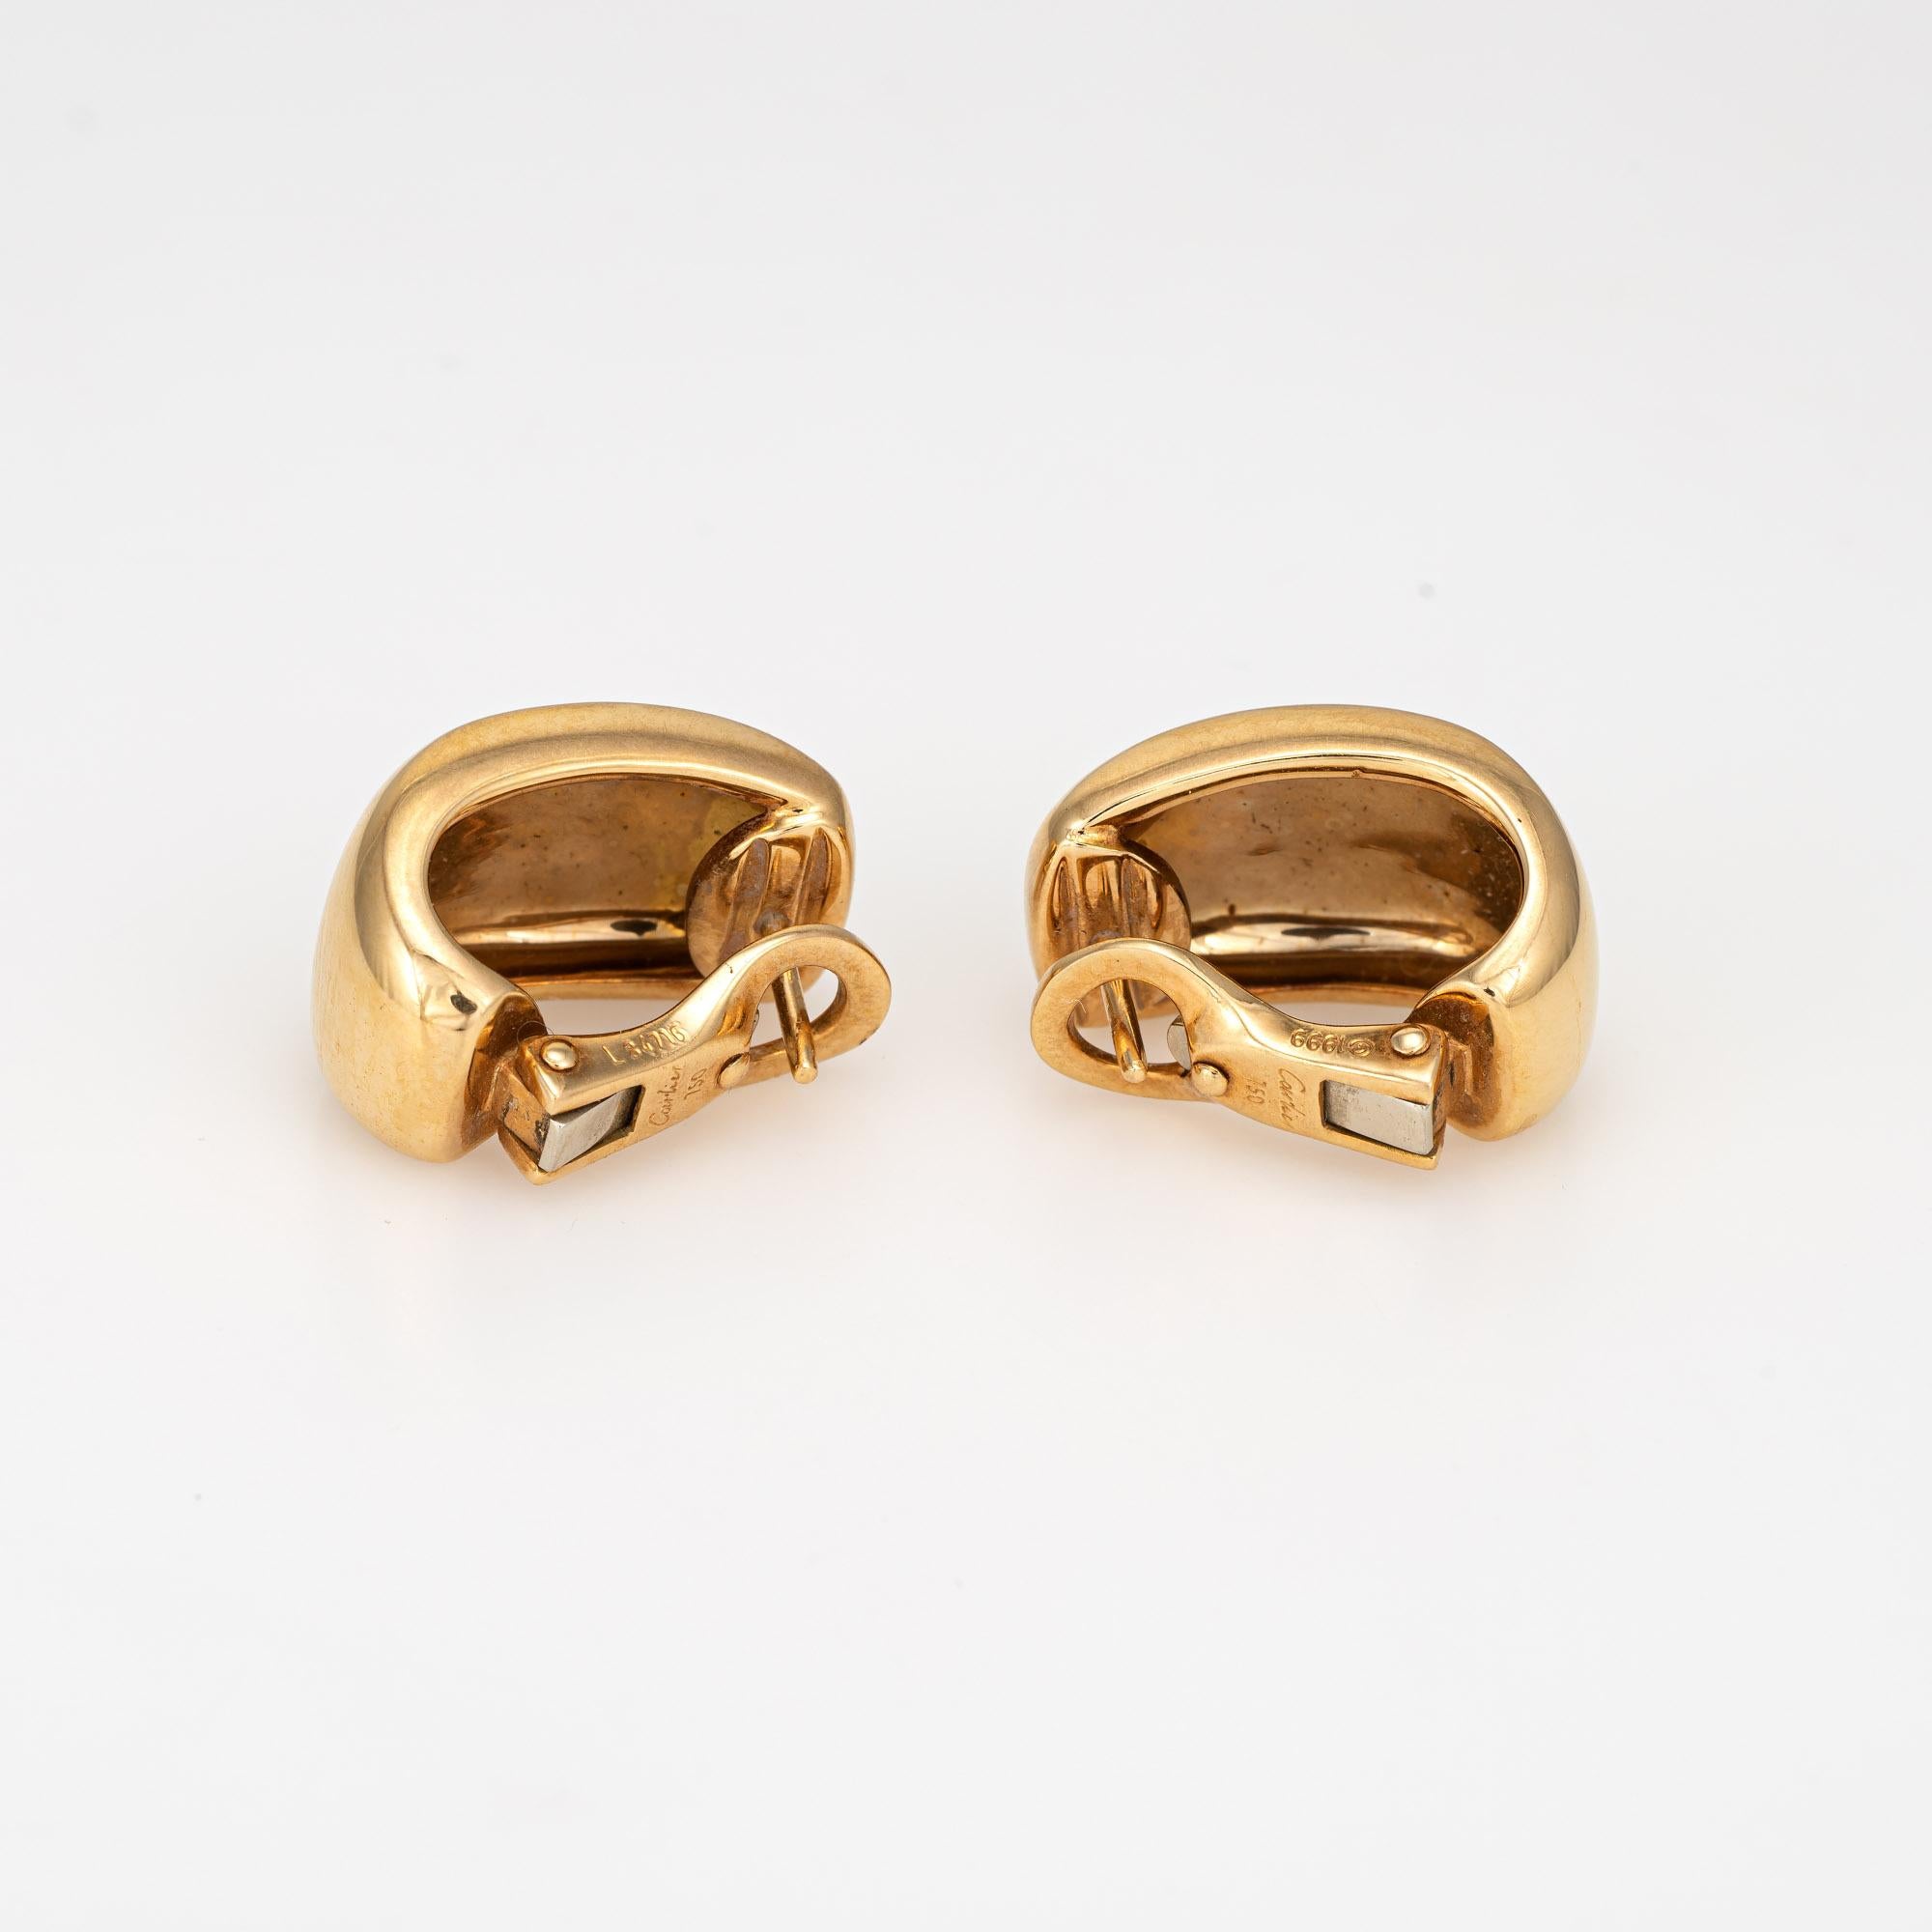 Out of production vintage Cartier 'Nouvelle Vague' earrings crafted in 18k yellow gold (circa 1999).  

The polished gold Cartier earrings measure 0.68 inches in length for a smaller shrimp style on the earlobe. The earrings are fitted with posts